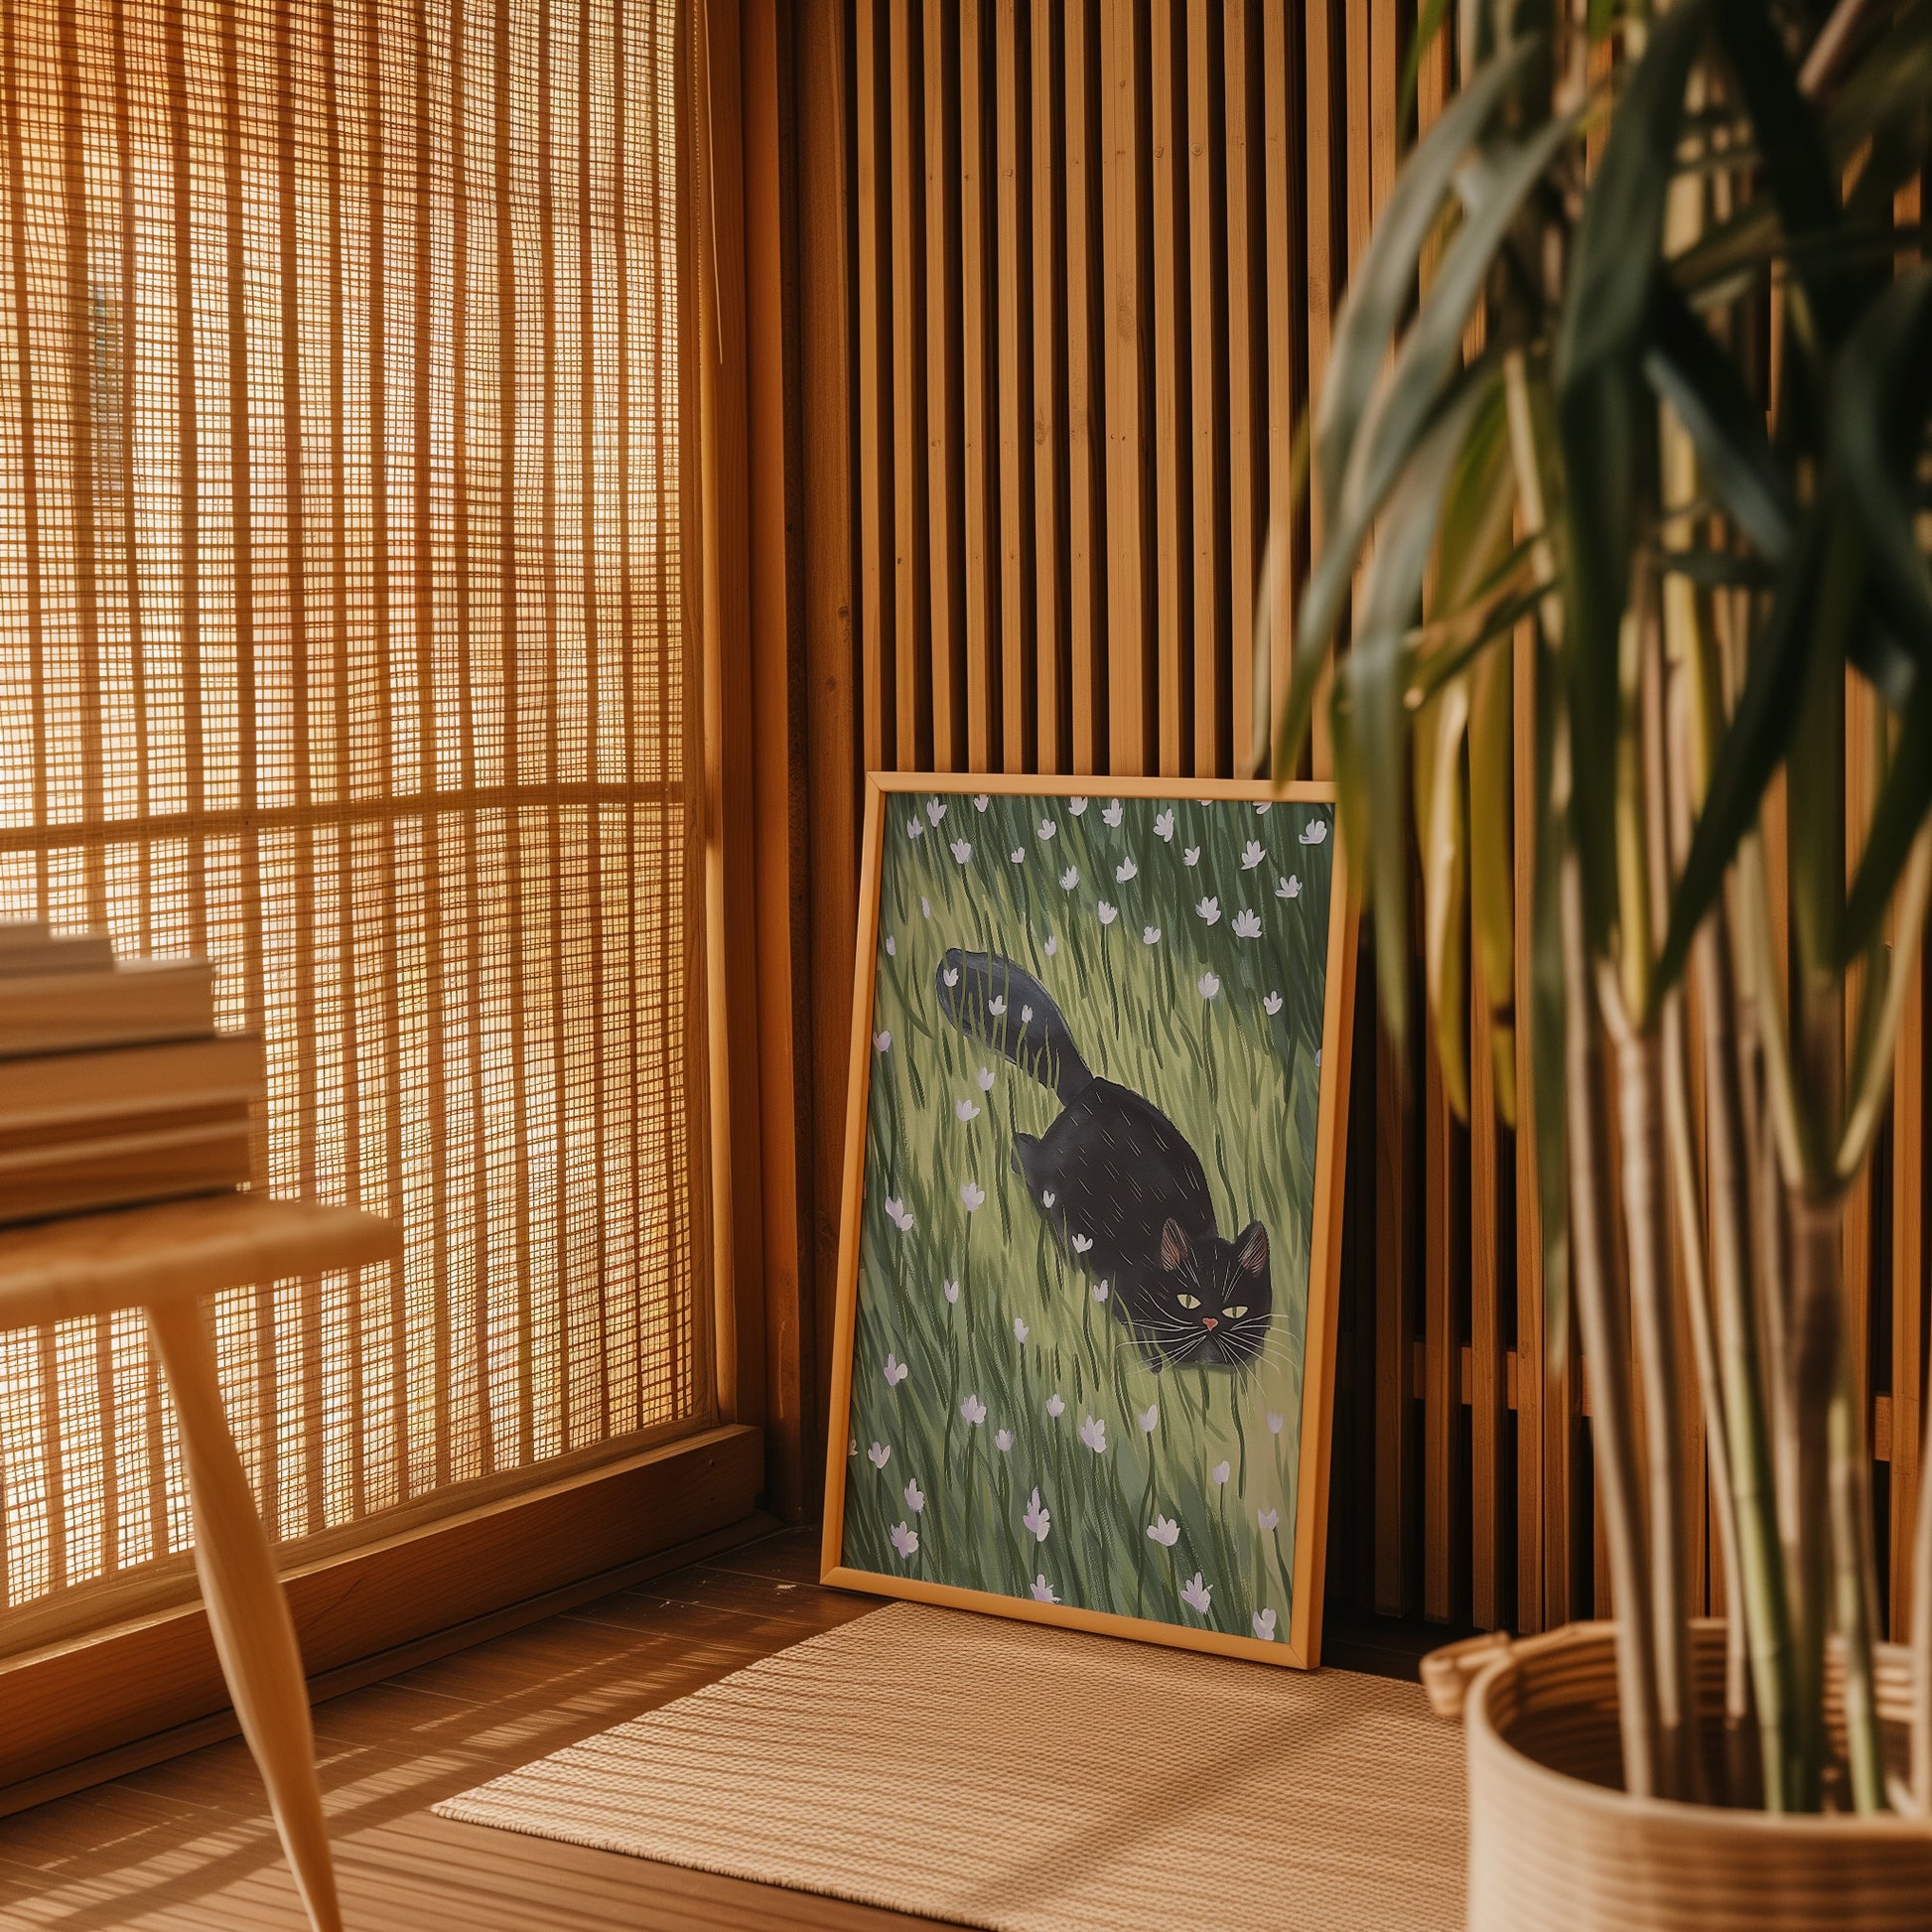 A painting of a black cat among green grass placed against a wall in a room with bamboo blinds.